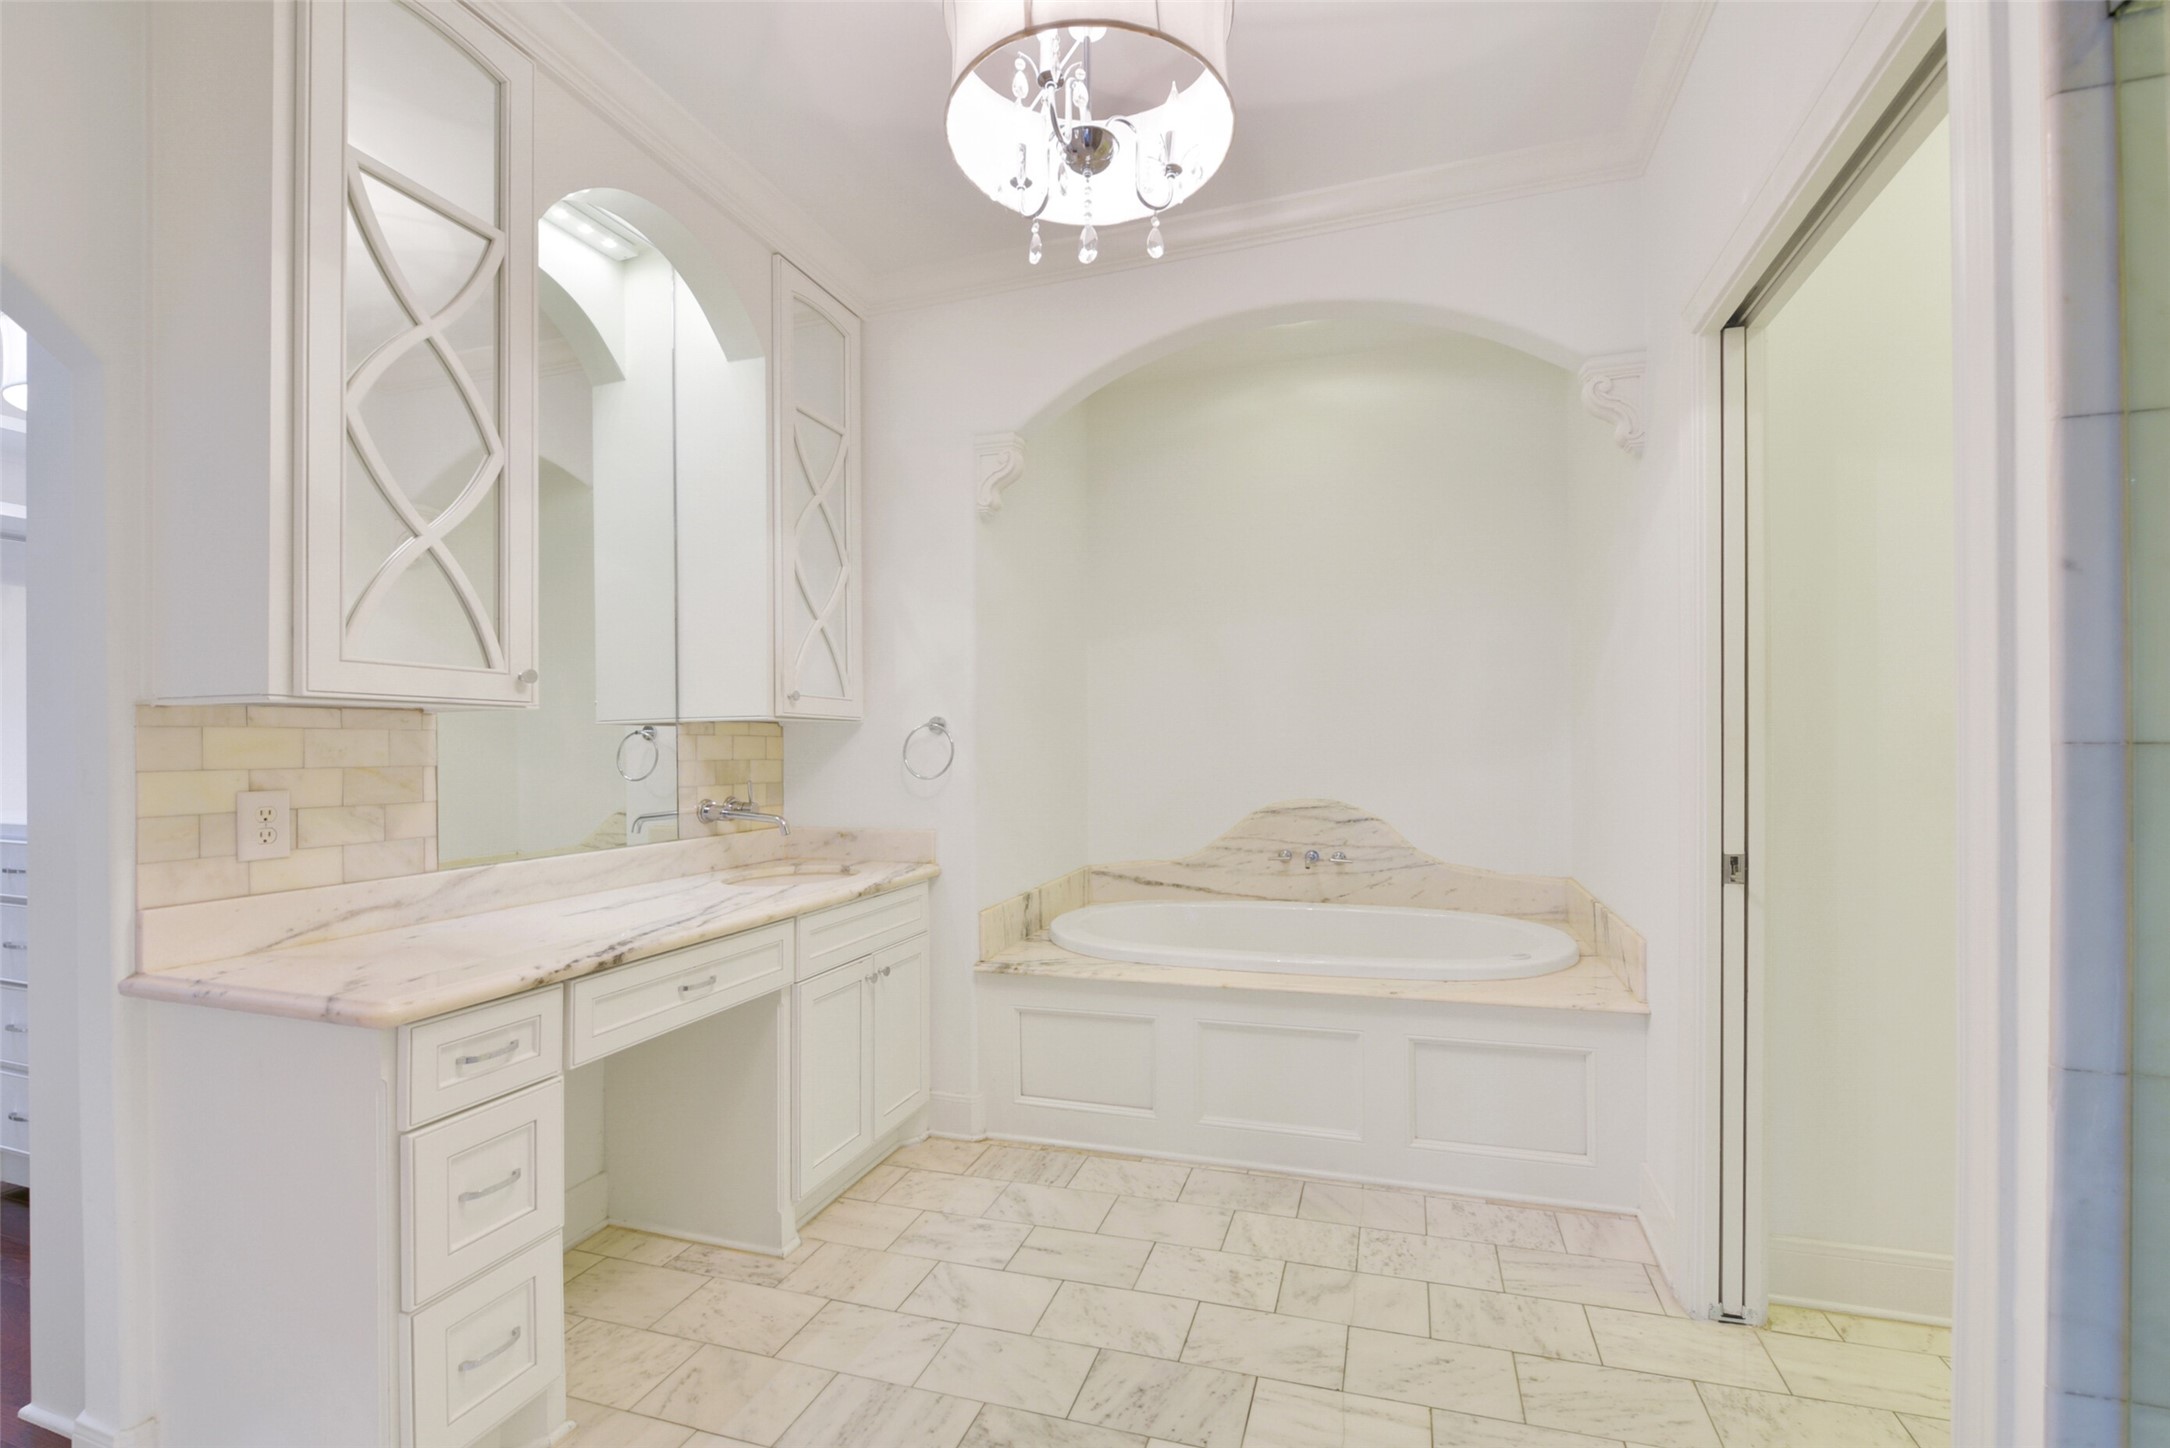 One of the dual primary bath's includes sit down vanity, large soaking tub, marble floors, countertops and surrounds as well as a separate shower.